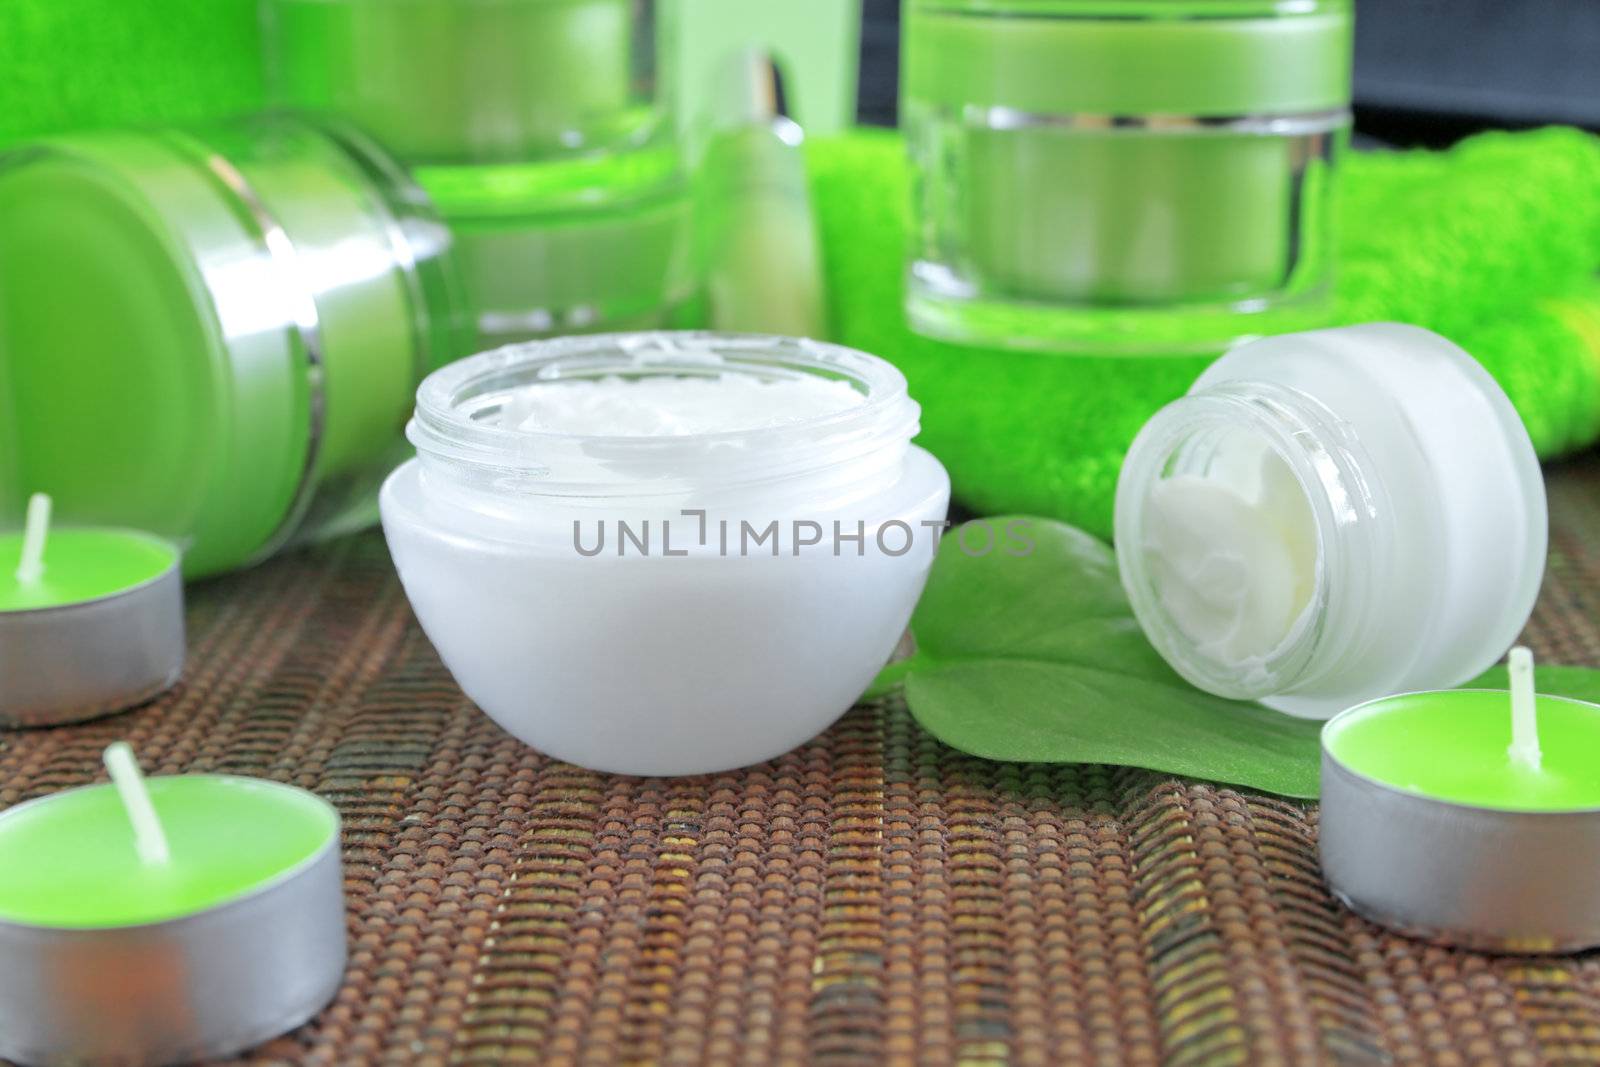 creams for body care in transparent and green containers